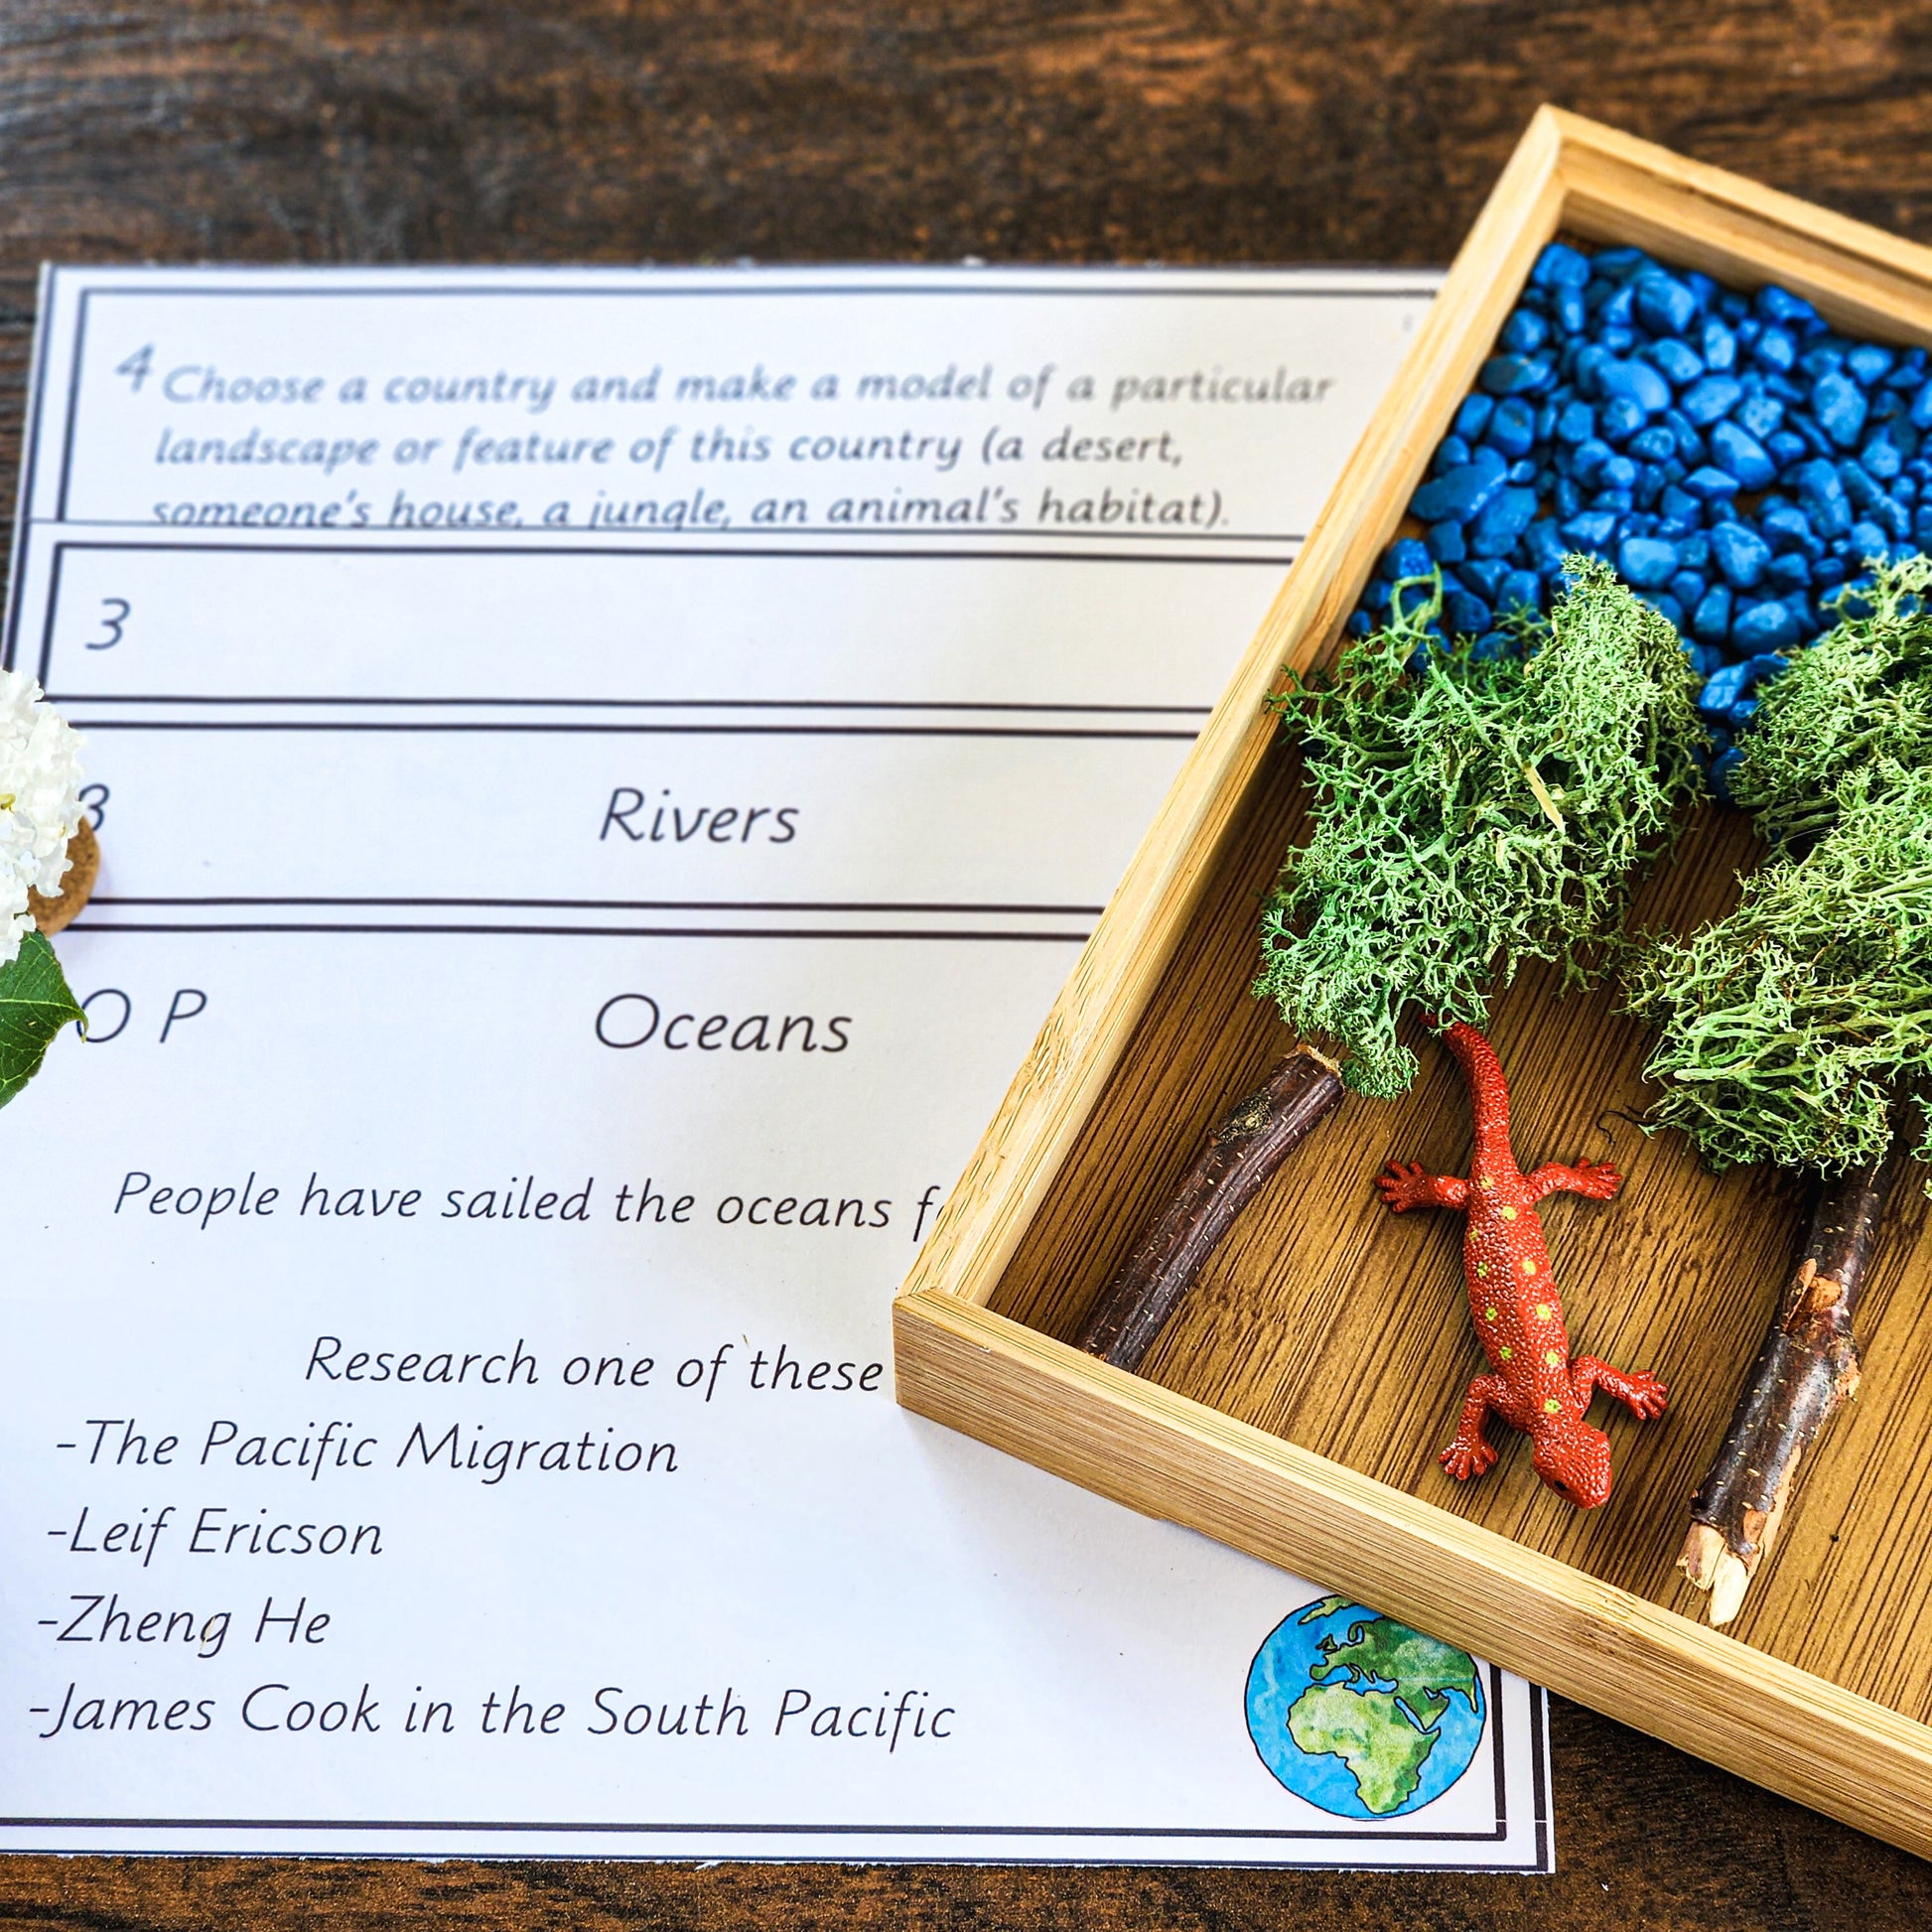 Cultural and Physical Geography Research Projects for 6 - 9 year olds - montessorikiwi